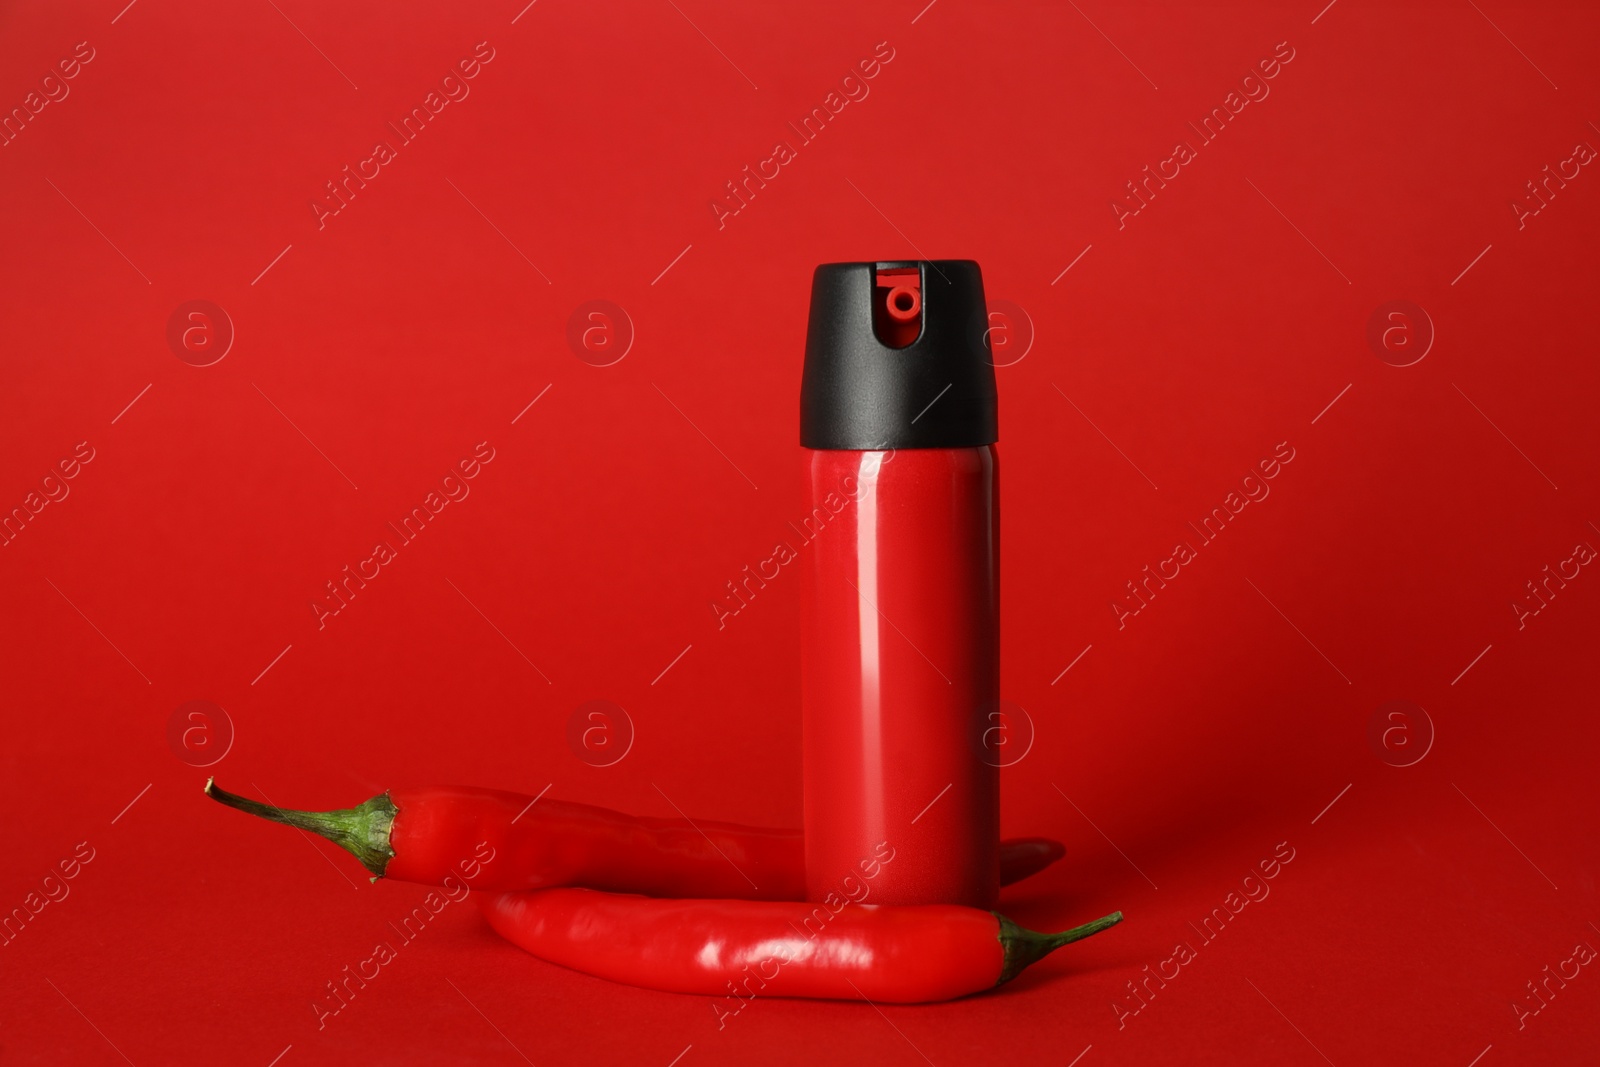 Photo of Bottle of gas pepper spray and fresh chili peppers on red background